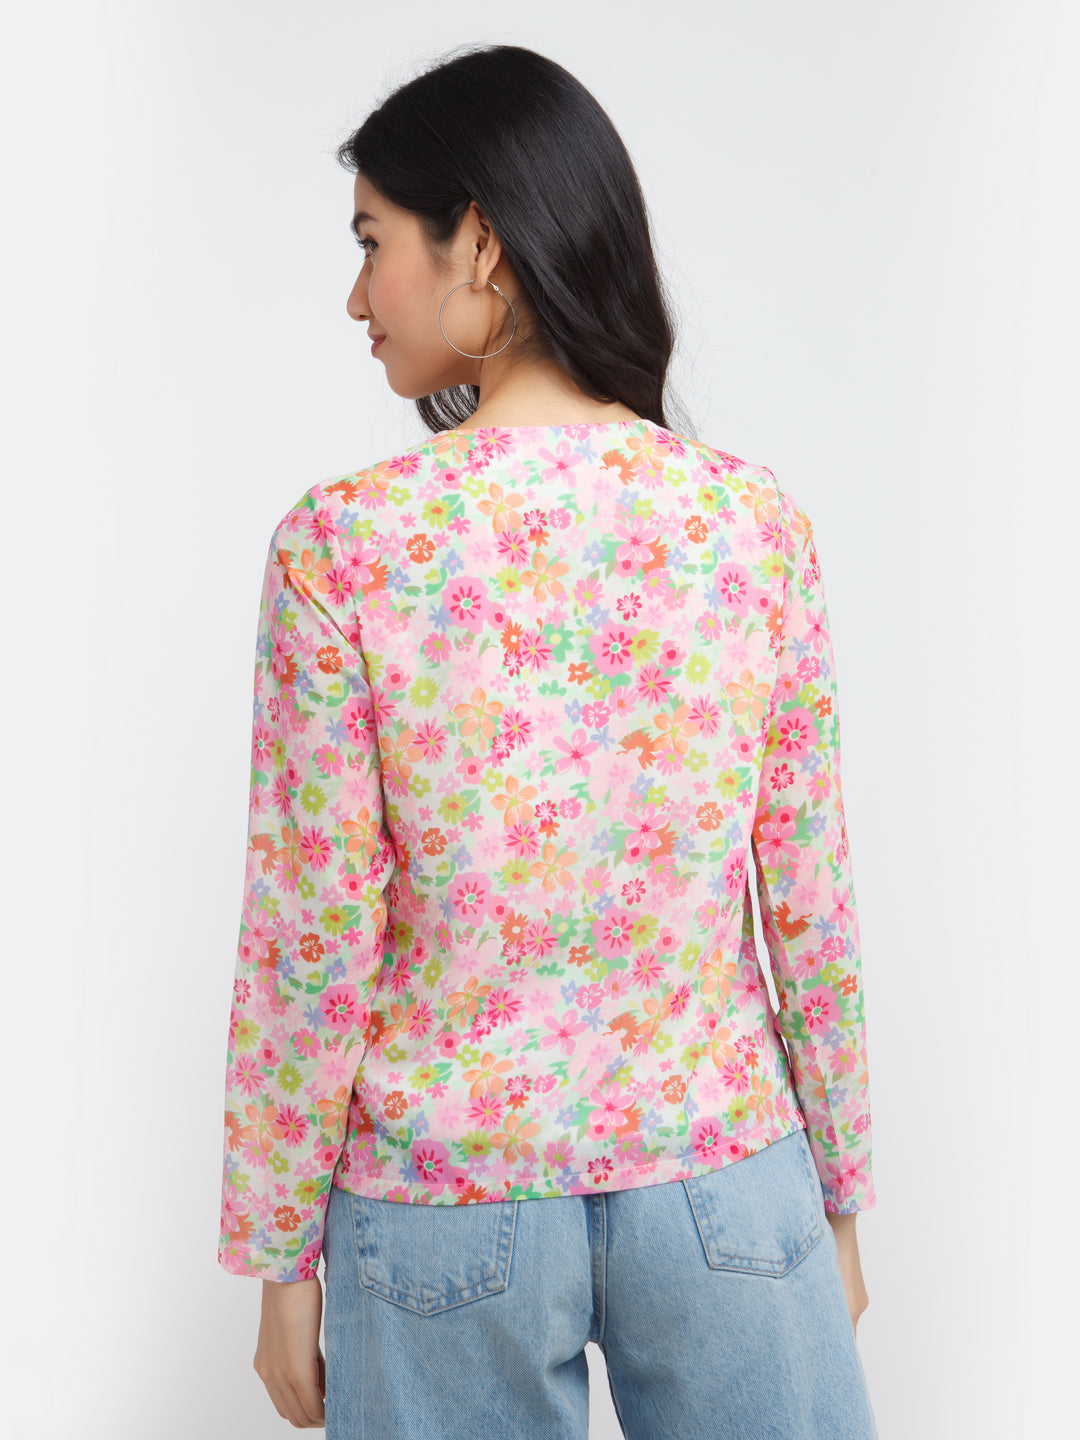 Multicolored Printed Top For Women